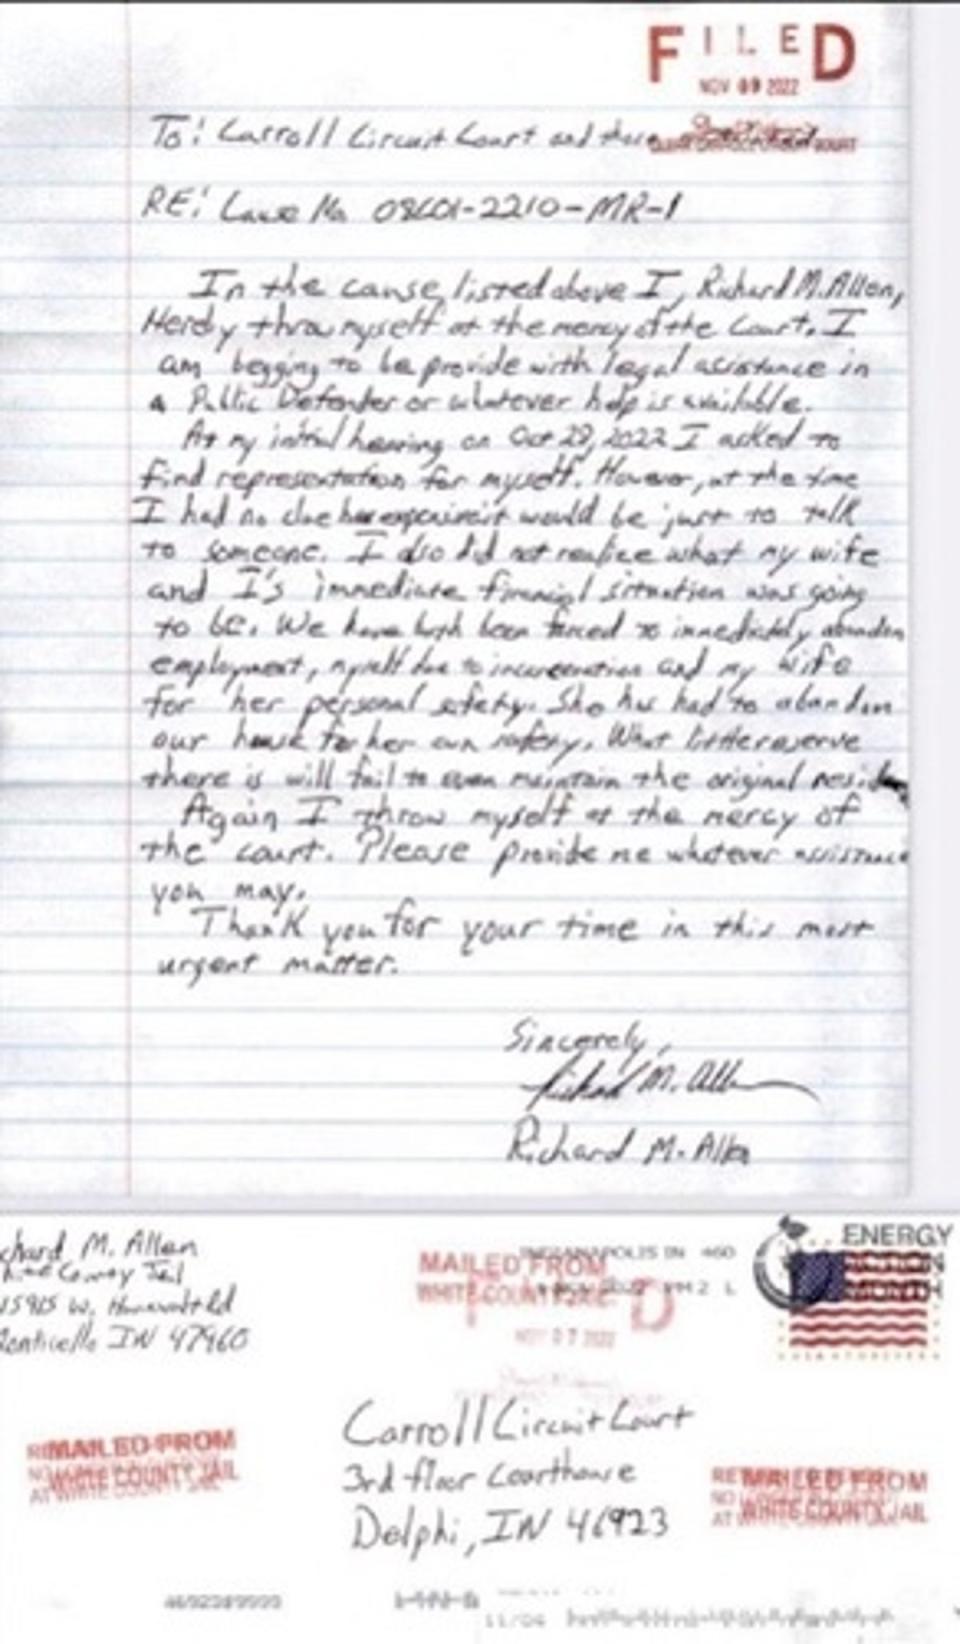 The handwritten letter Richard Allen penned to the court (Provided)